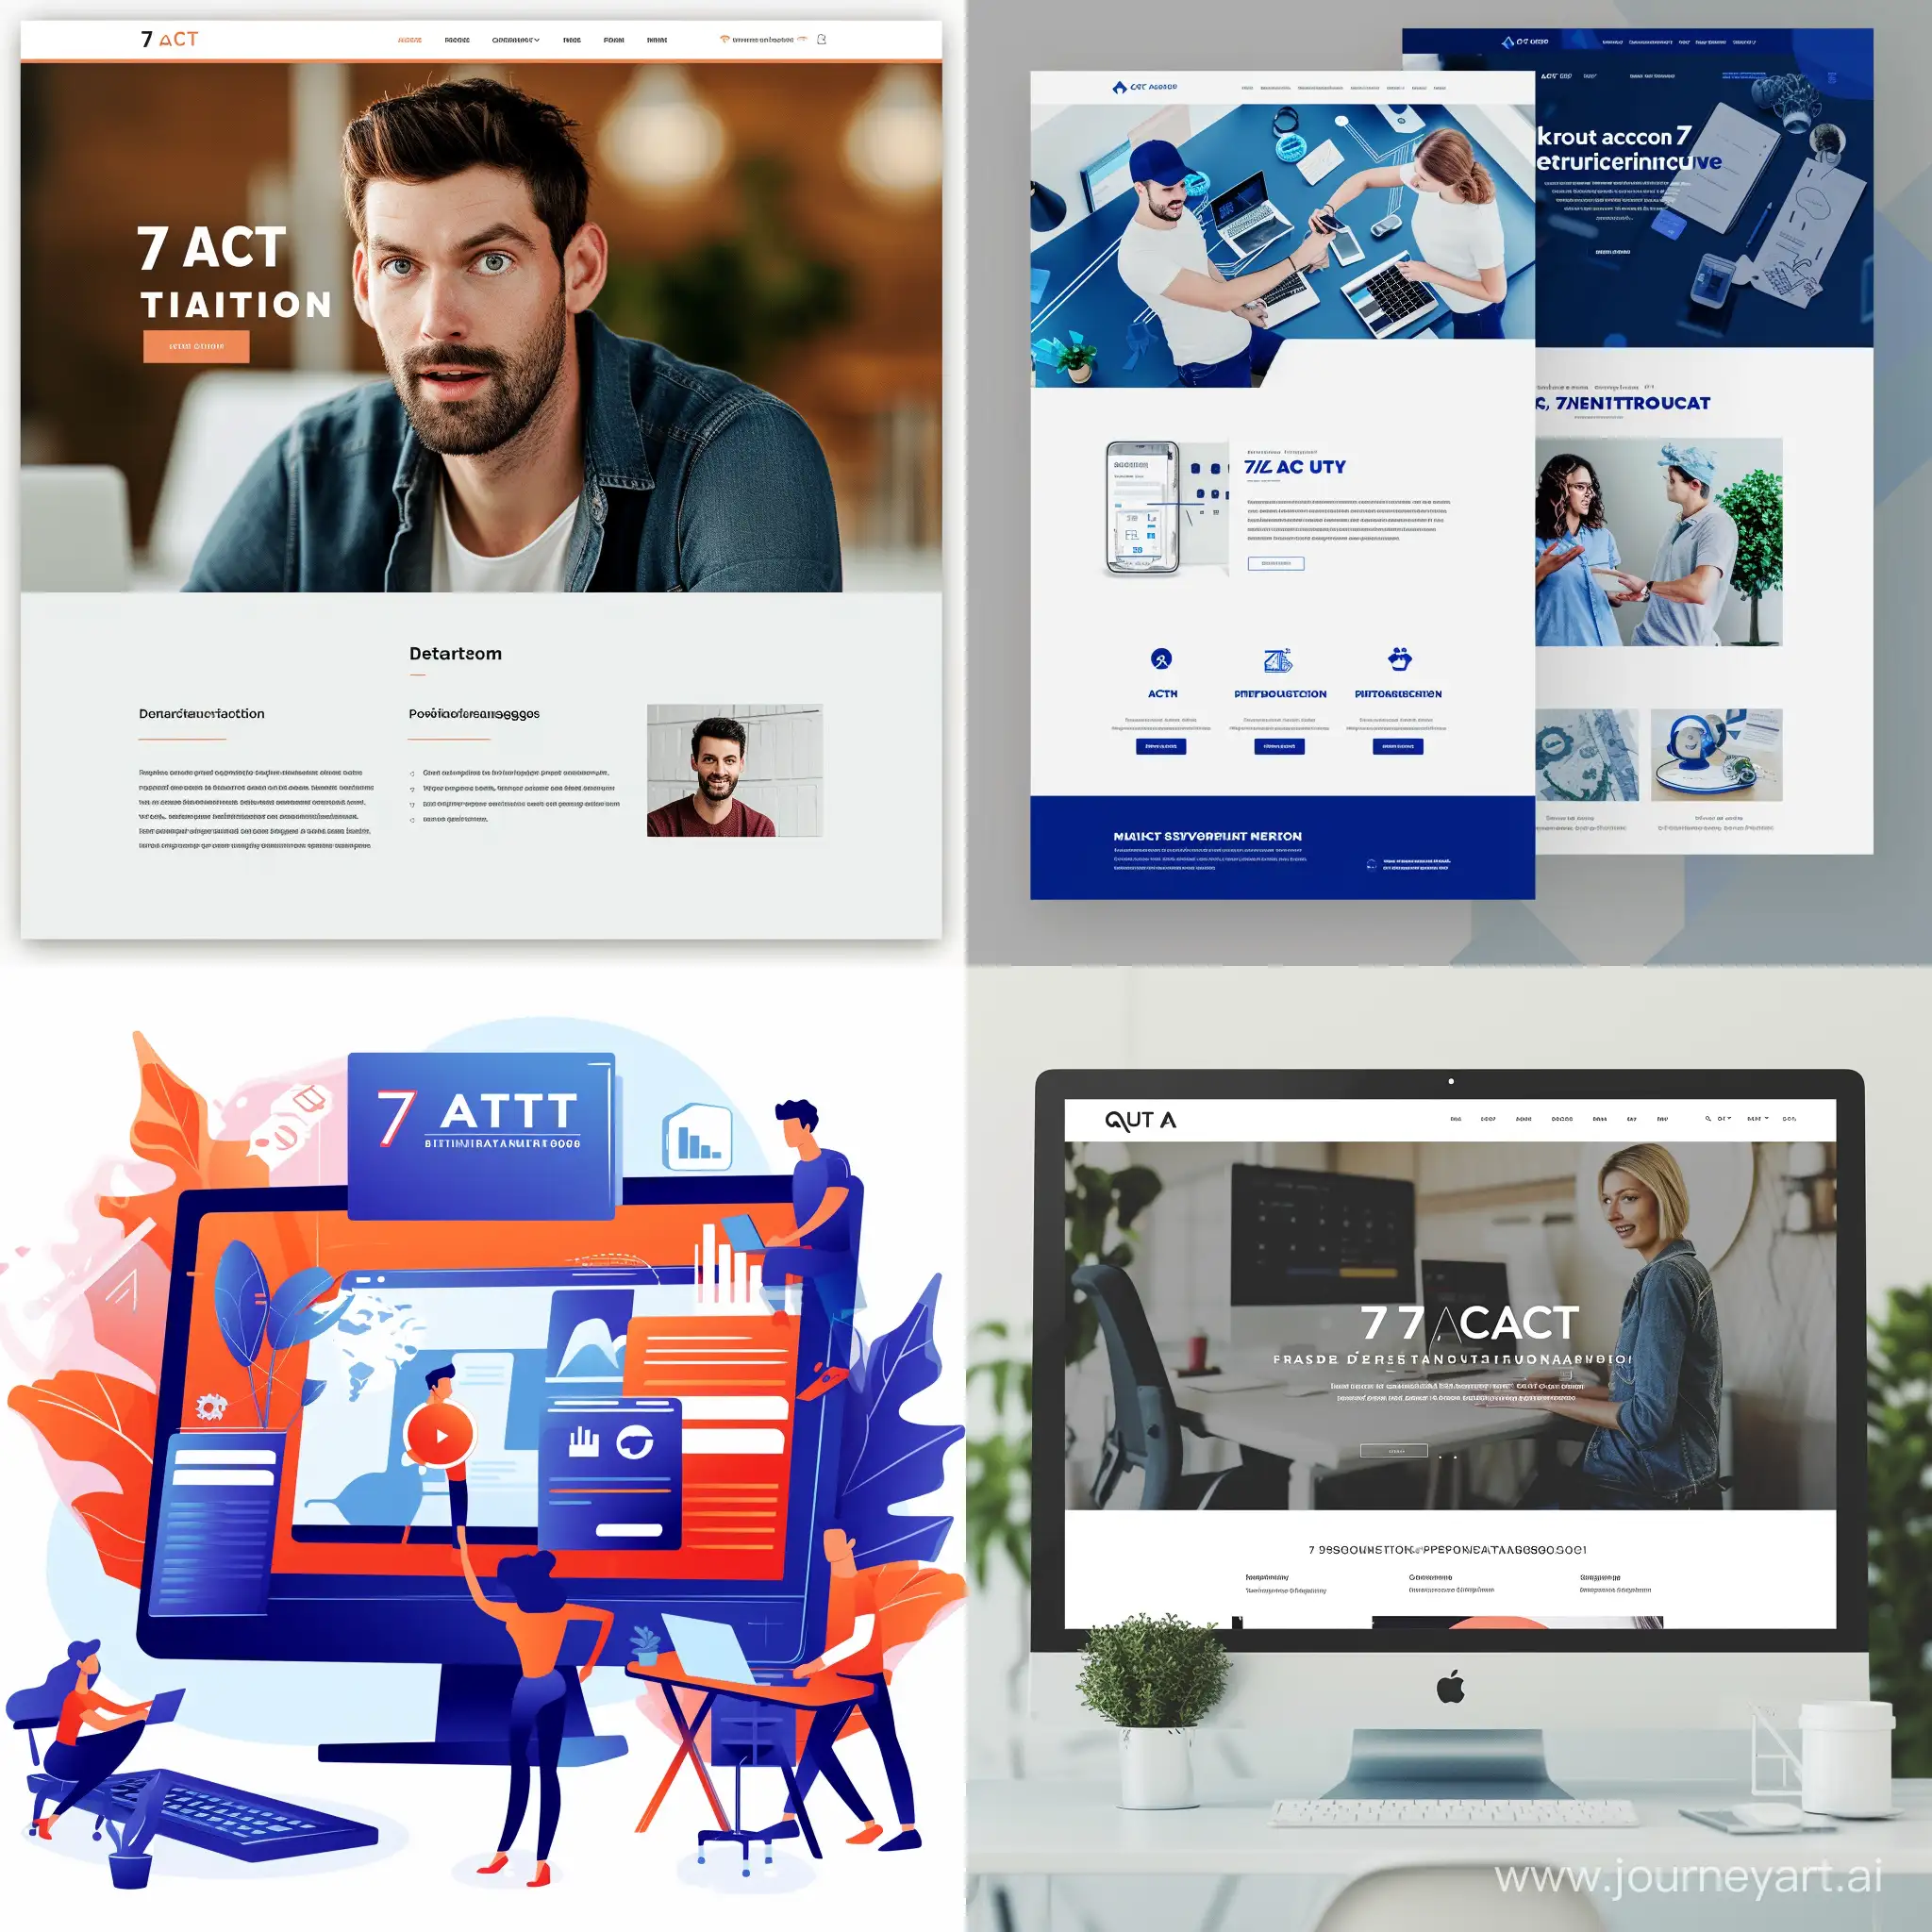 1920 by 896 pixels Website slider for an agency specialised in consulting, professional training, Digital transformation and Digital marketing services. The agency called 7 ACT agency.